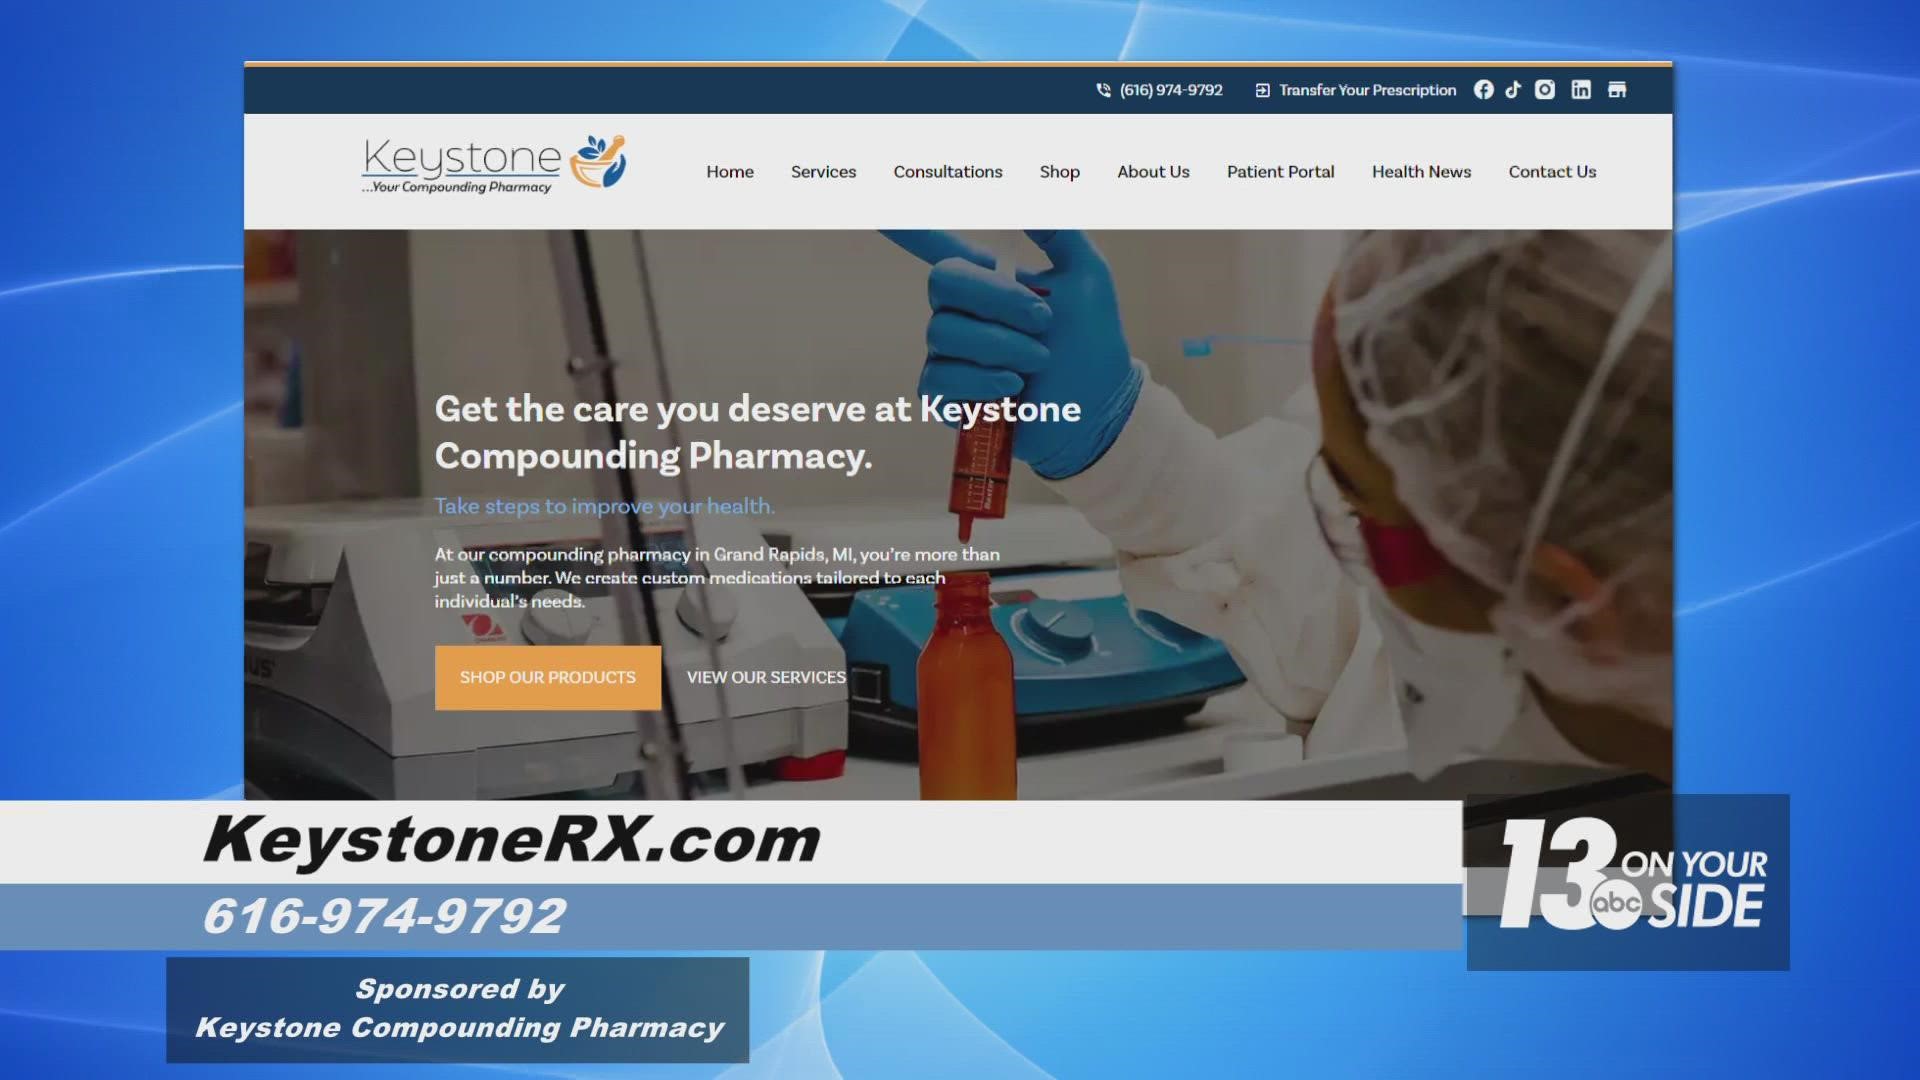 Learn more about genomic testing by calling Keystone Pharmacy at 616-974-9792, or visit their website.